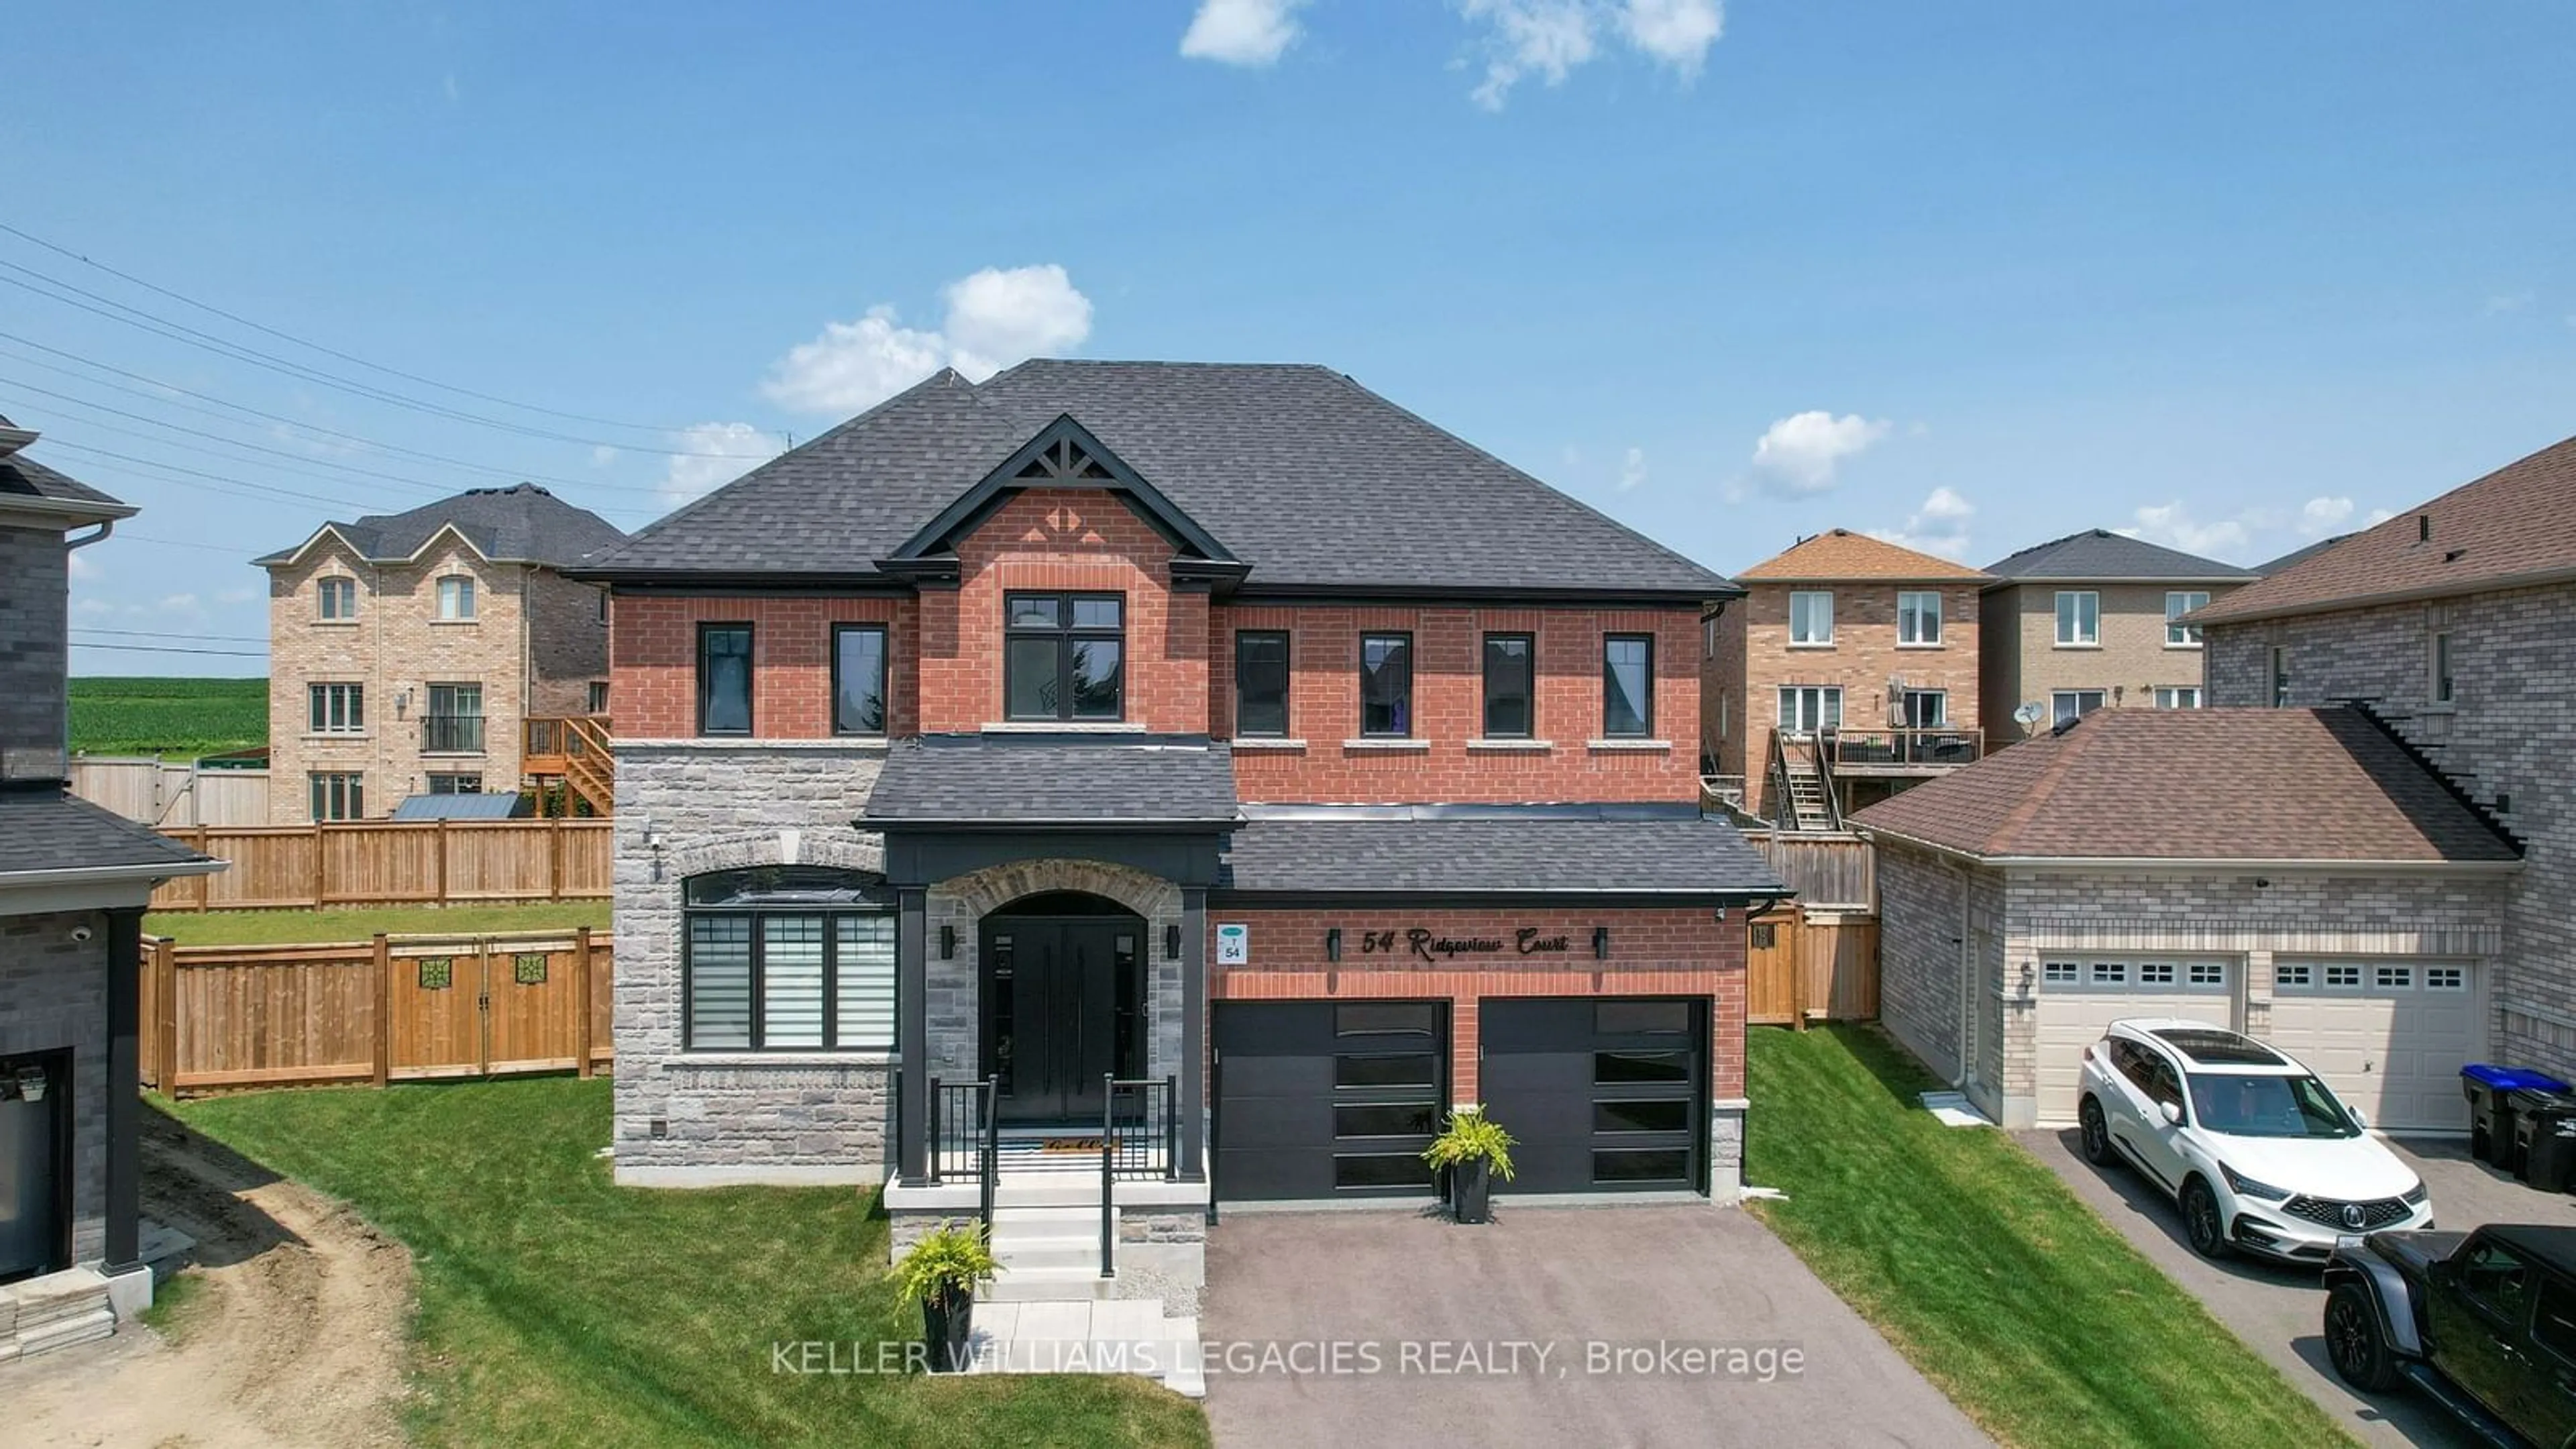 Home with brick exterior material for 54 Ridgeview Crt, Bradford West Gwillimbury Ontario L3Z 0R9